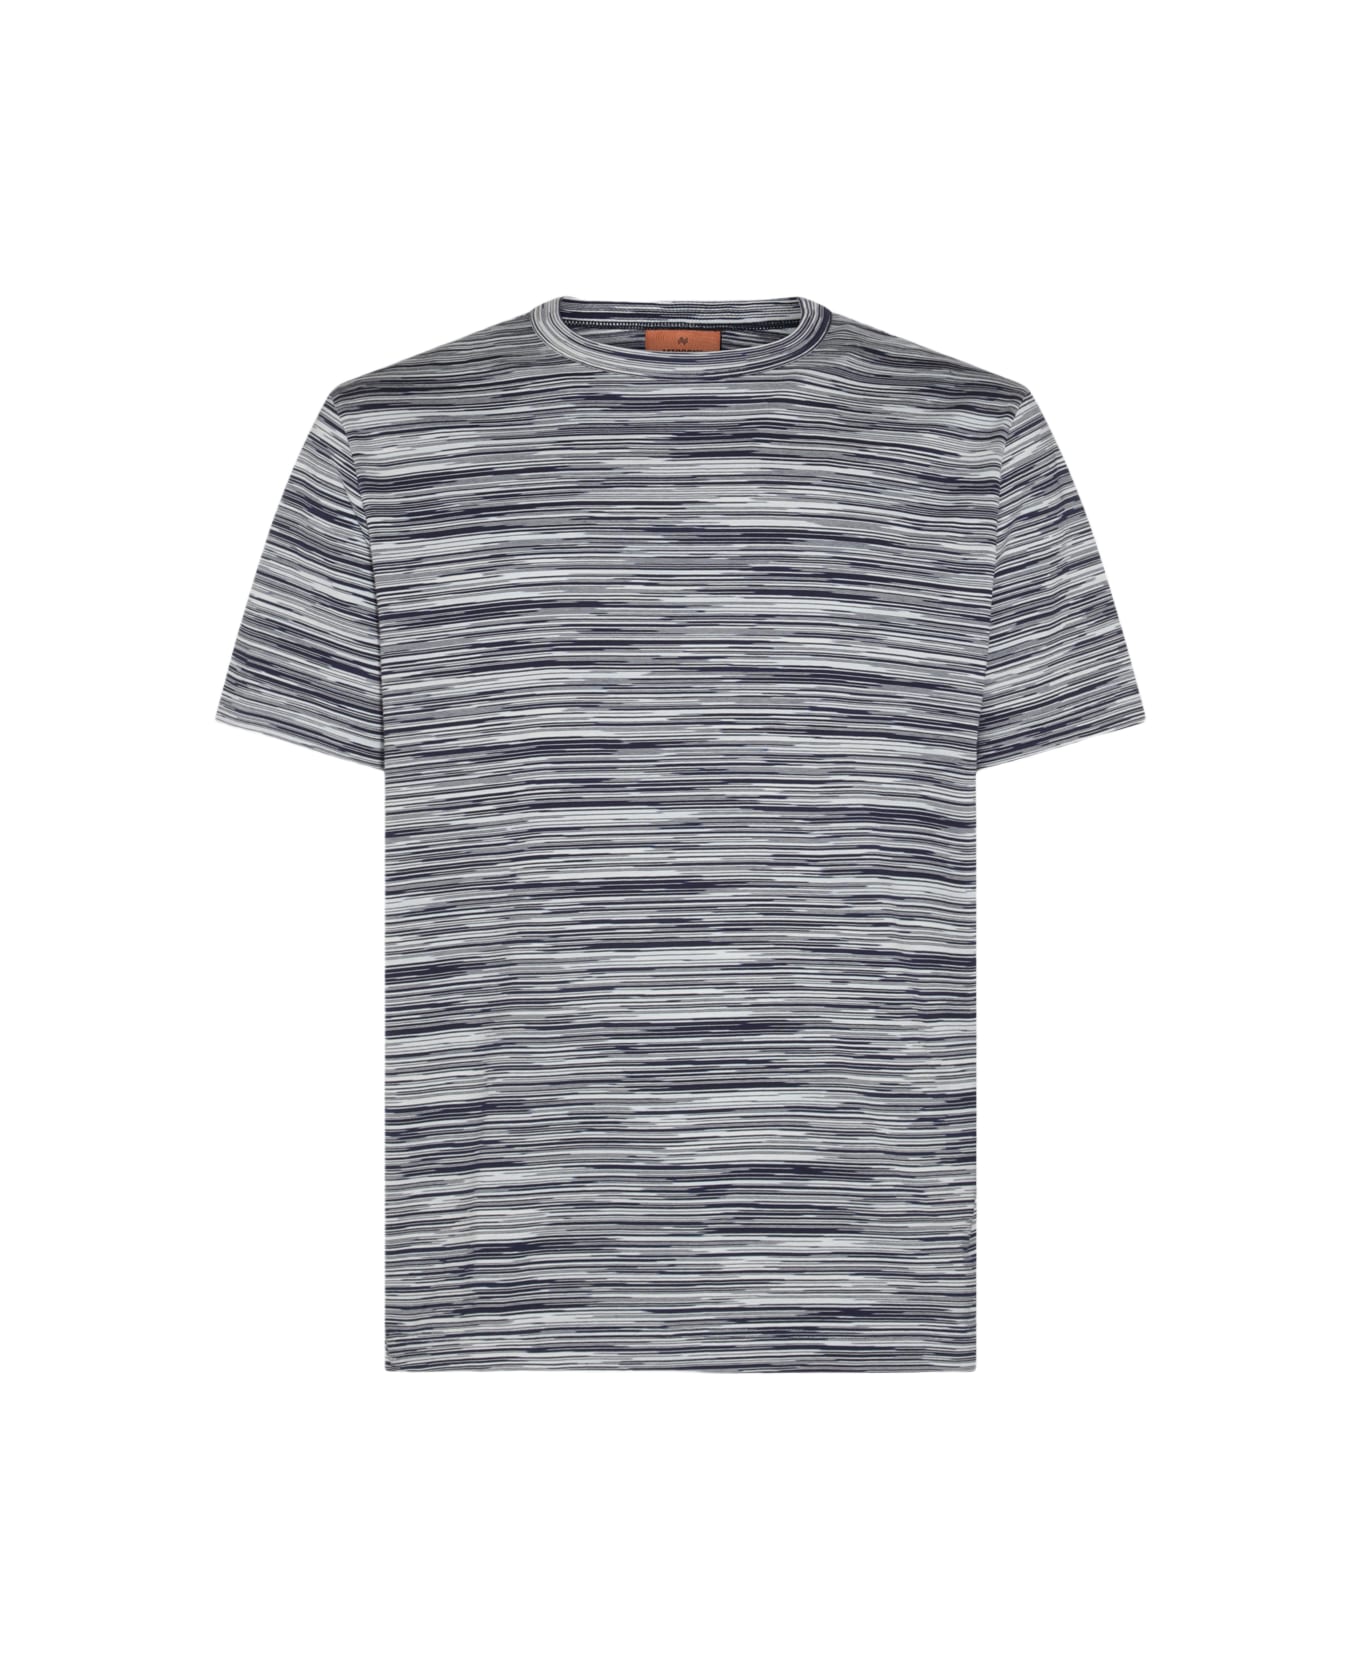 Missoni Multicolor Cotton T-shirt - SPACE DYED NAVY WHITE